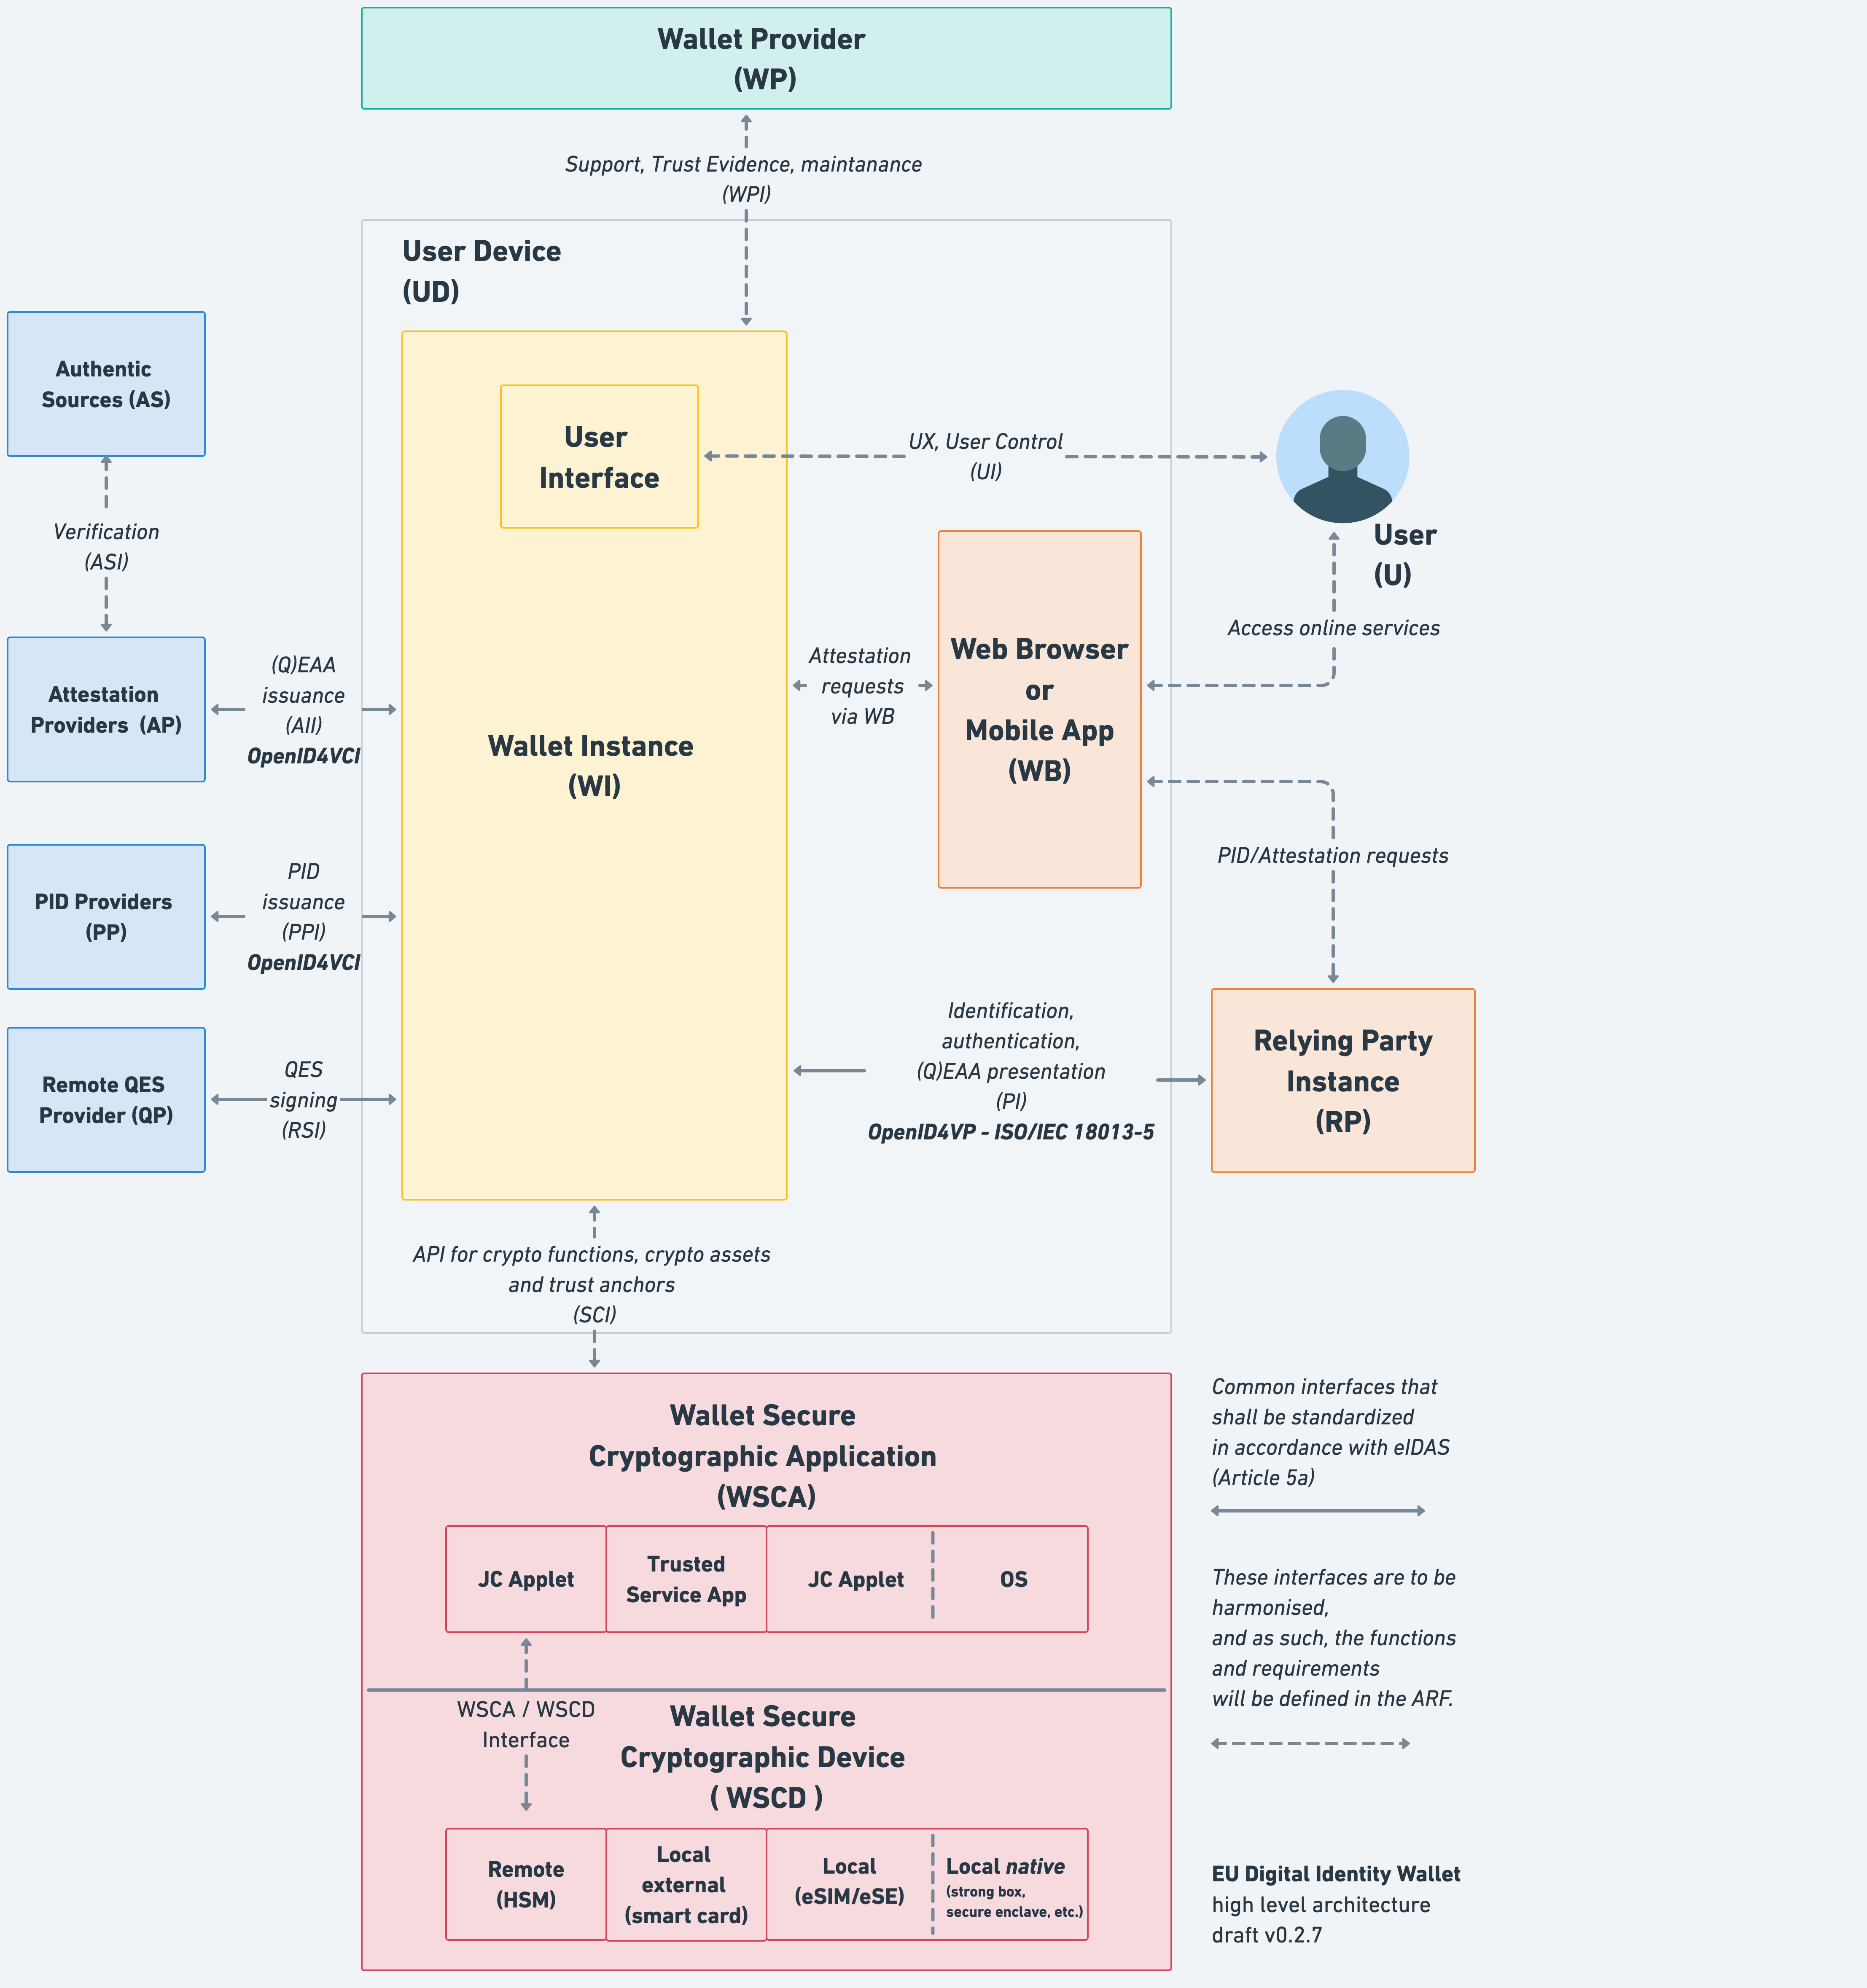 Figure 2: EUDI Wallet Solution reference architecture